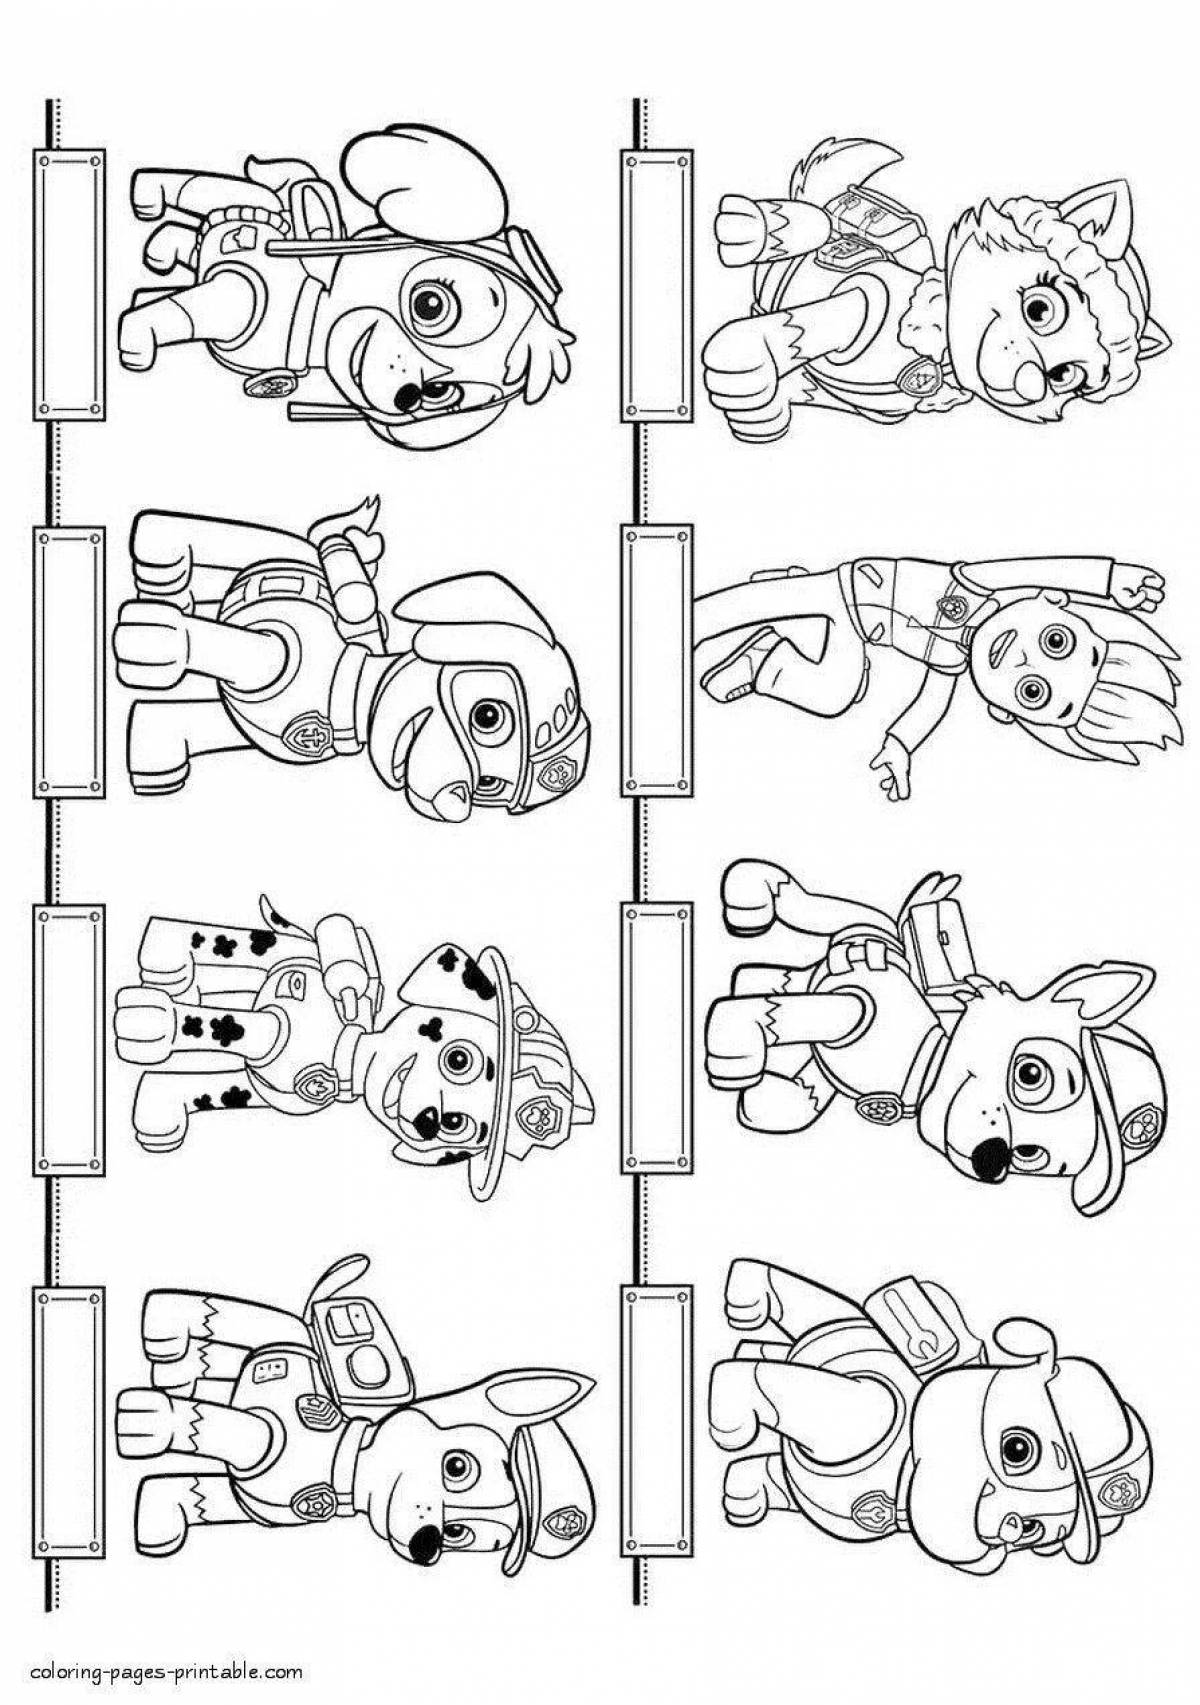 Amazing Paw Patrol Coloring Page